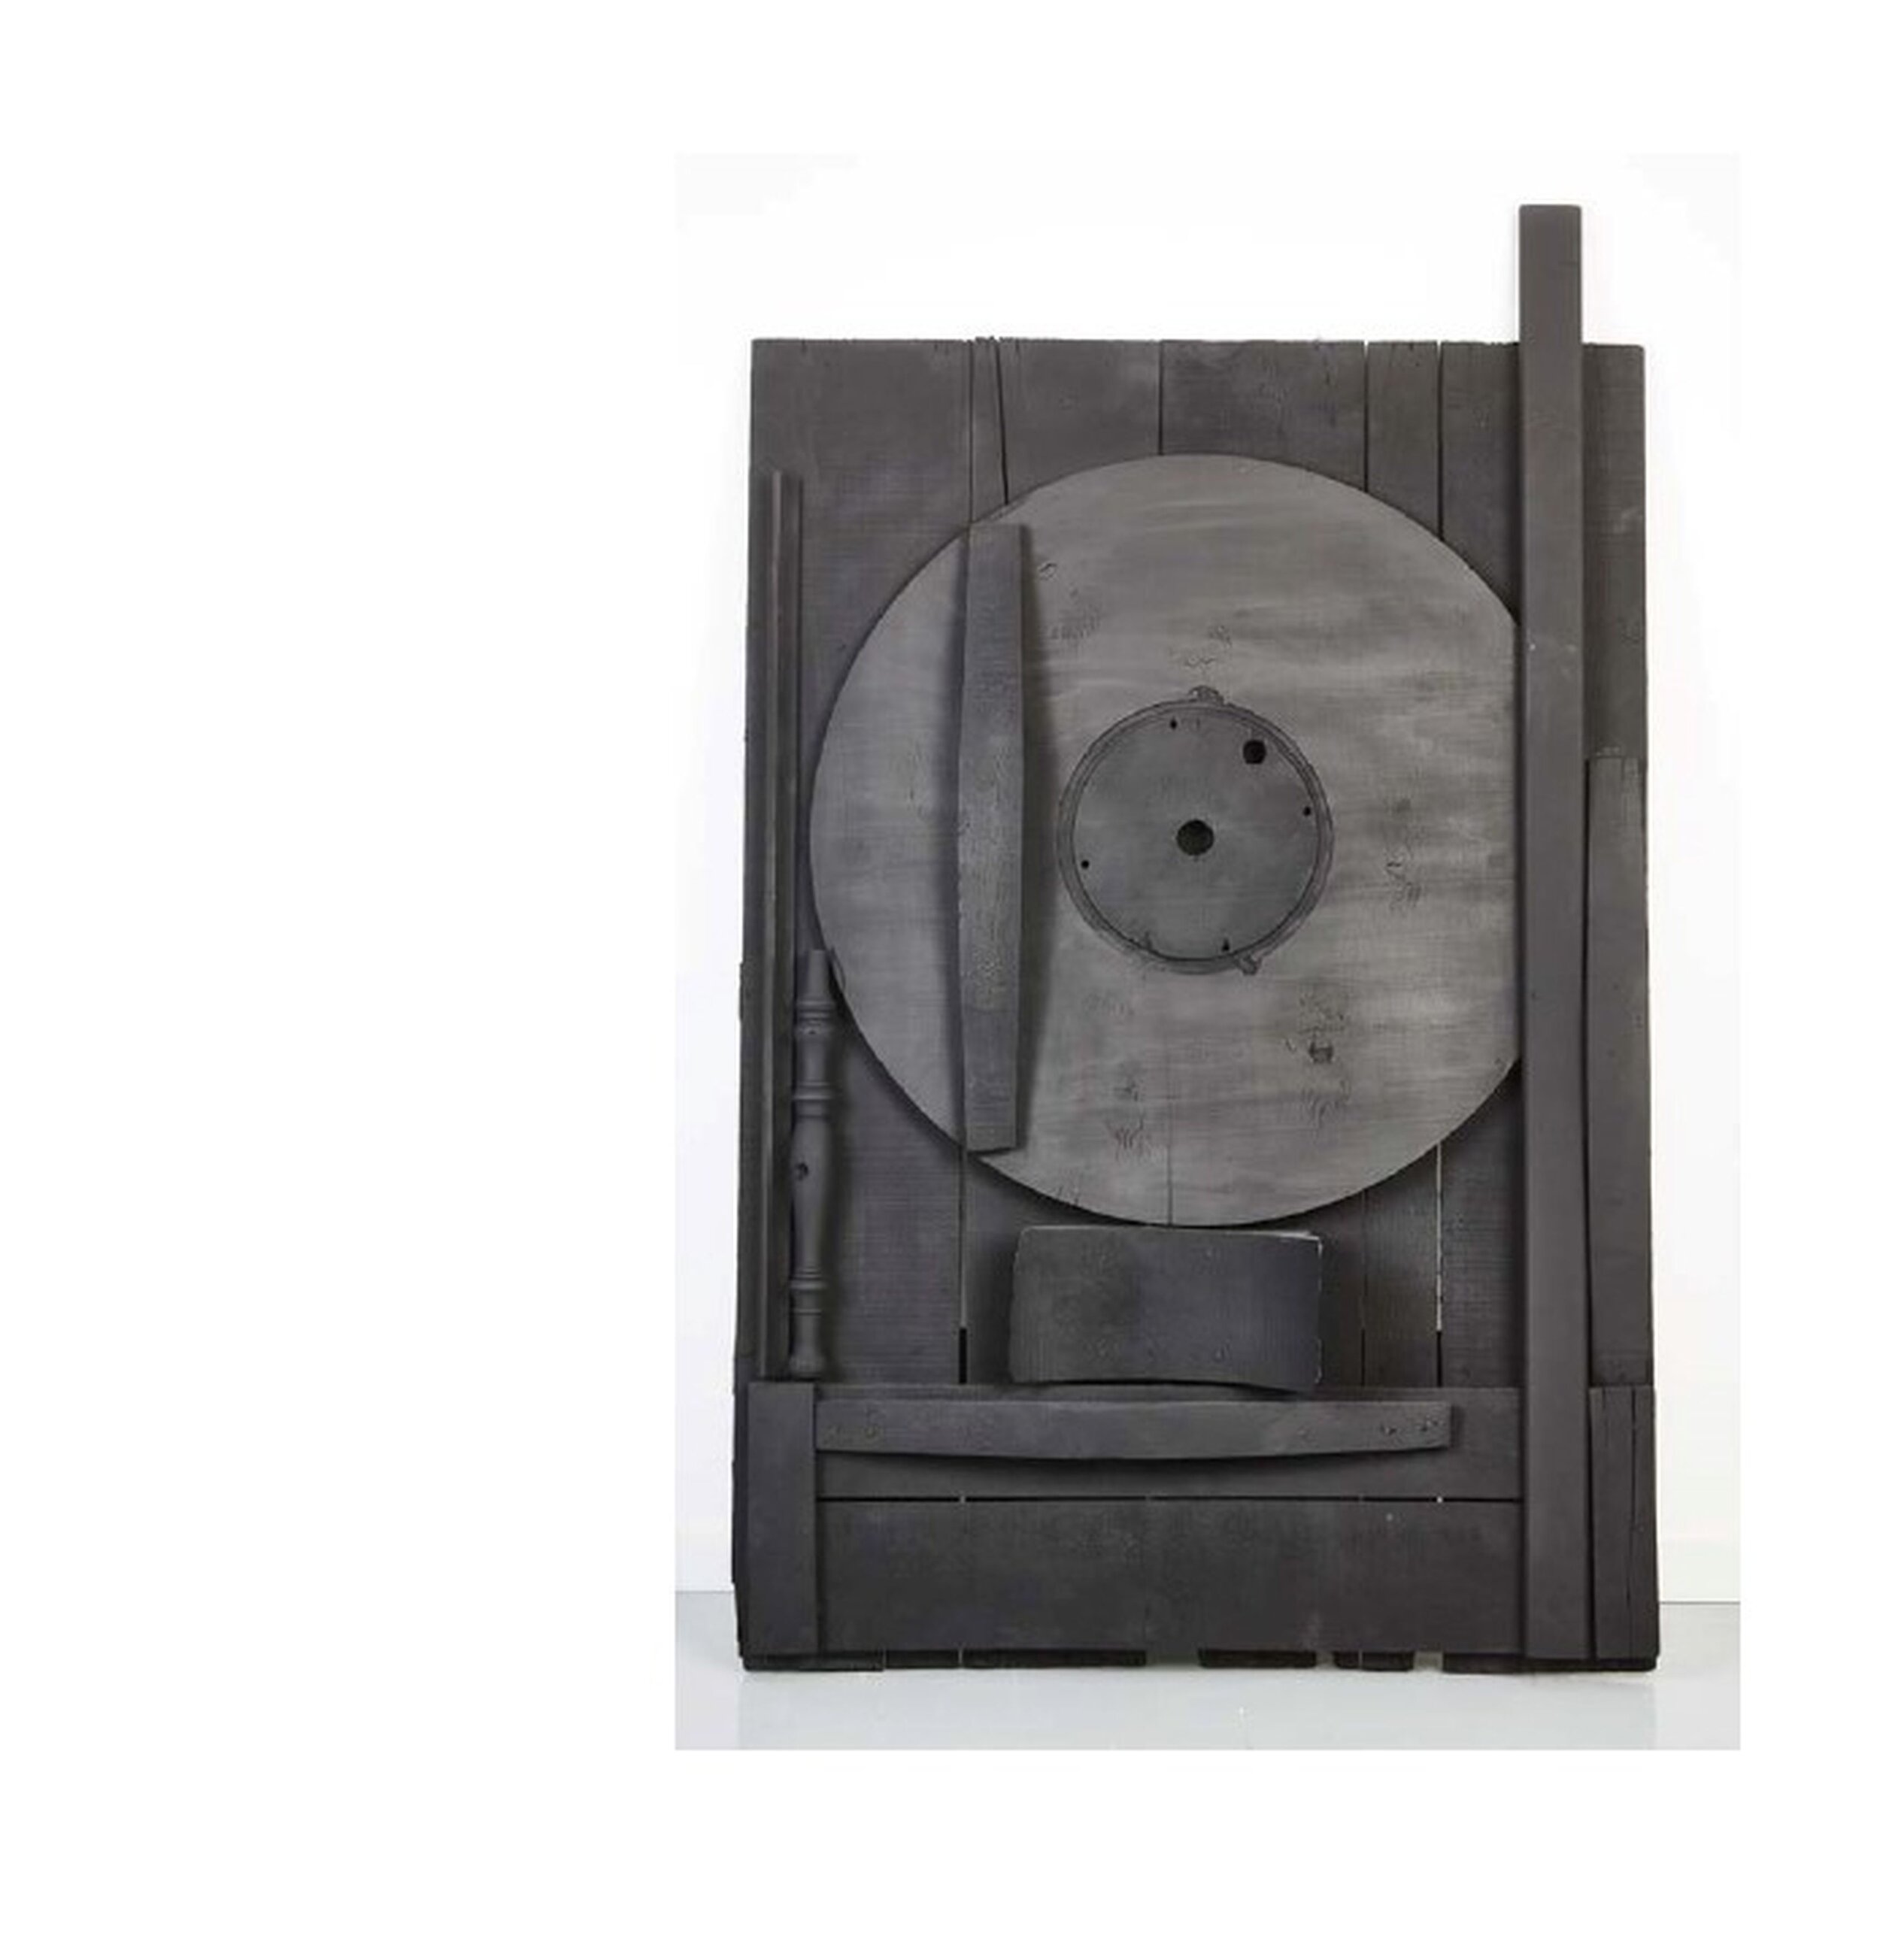 Louise Nevelson, Pennsylvania Round, 1973. Painted wood, 142.9 x 90.2 x 8.9 cm